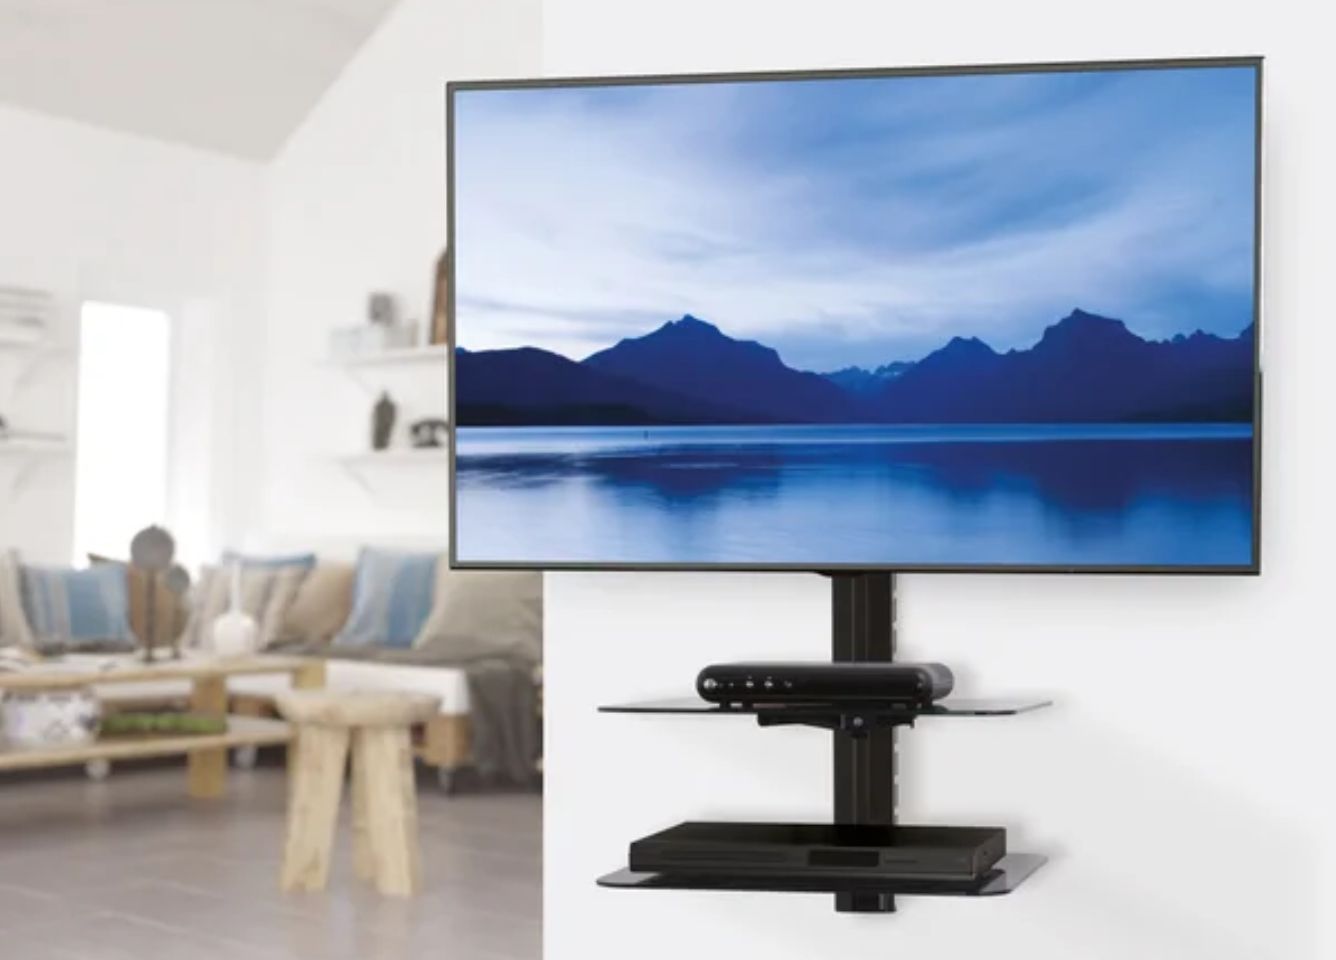 Image of a black TV wall mount stand and shelf with a TV secured to it featuring a lake and mountains on its display.